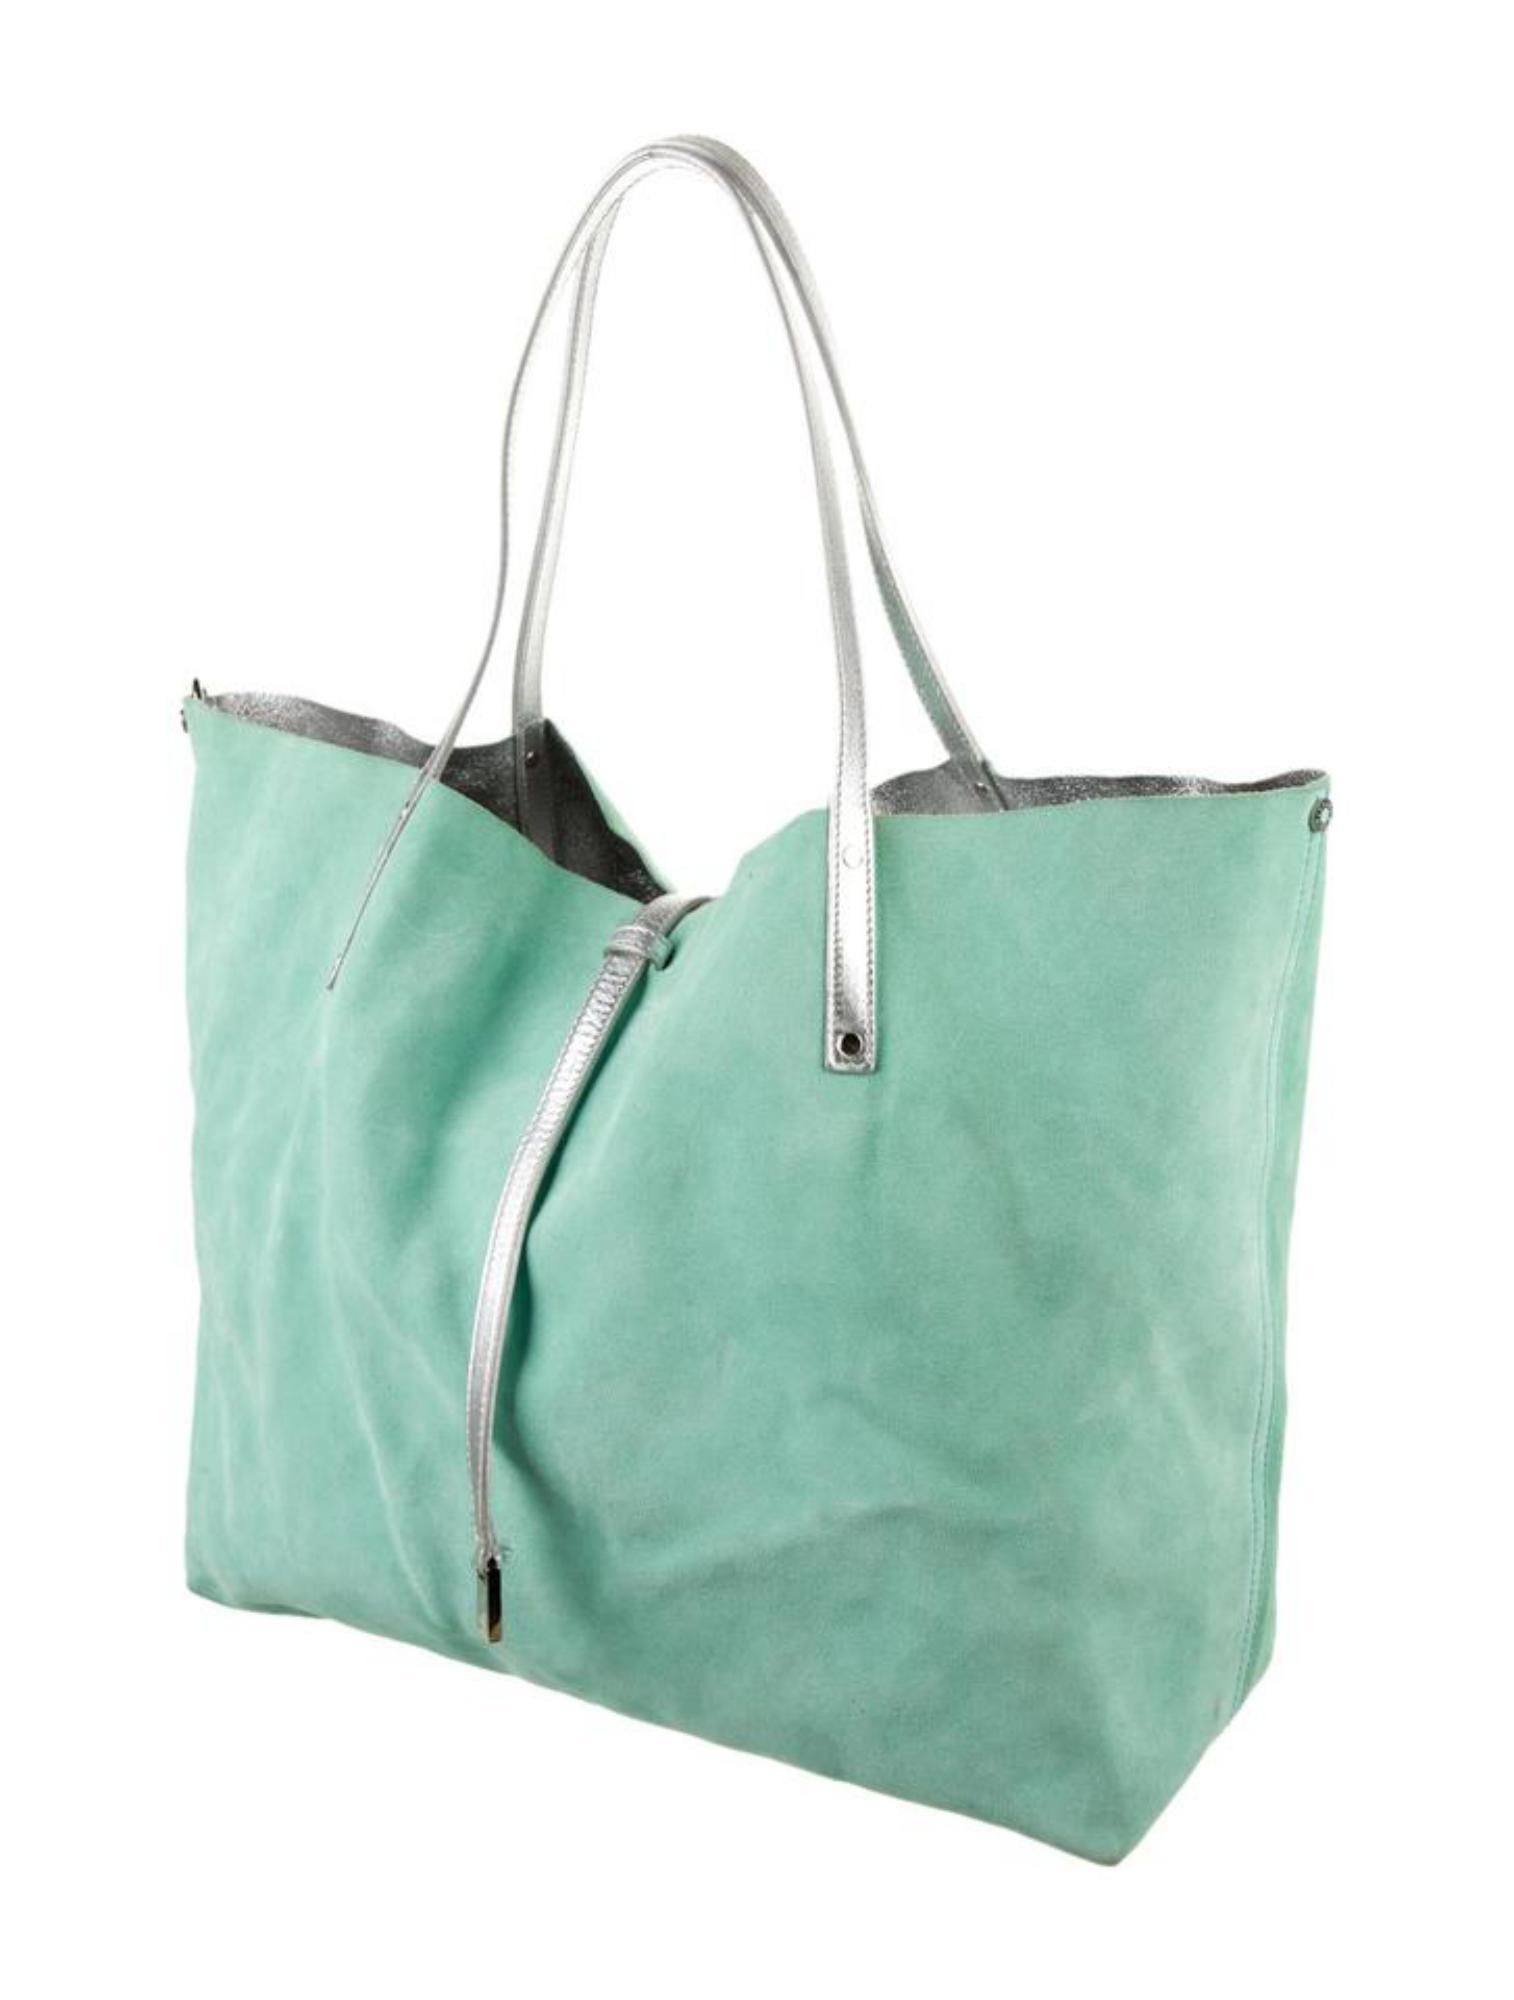 Tiffany & Co. Metallic Silver x Green Reversible Tote with Pouch 44t88
Made In: Italy
Measurements: Length:  15